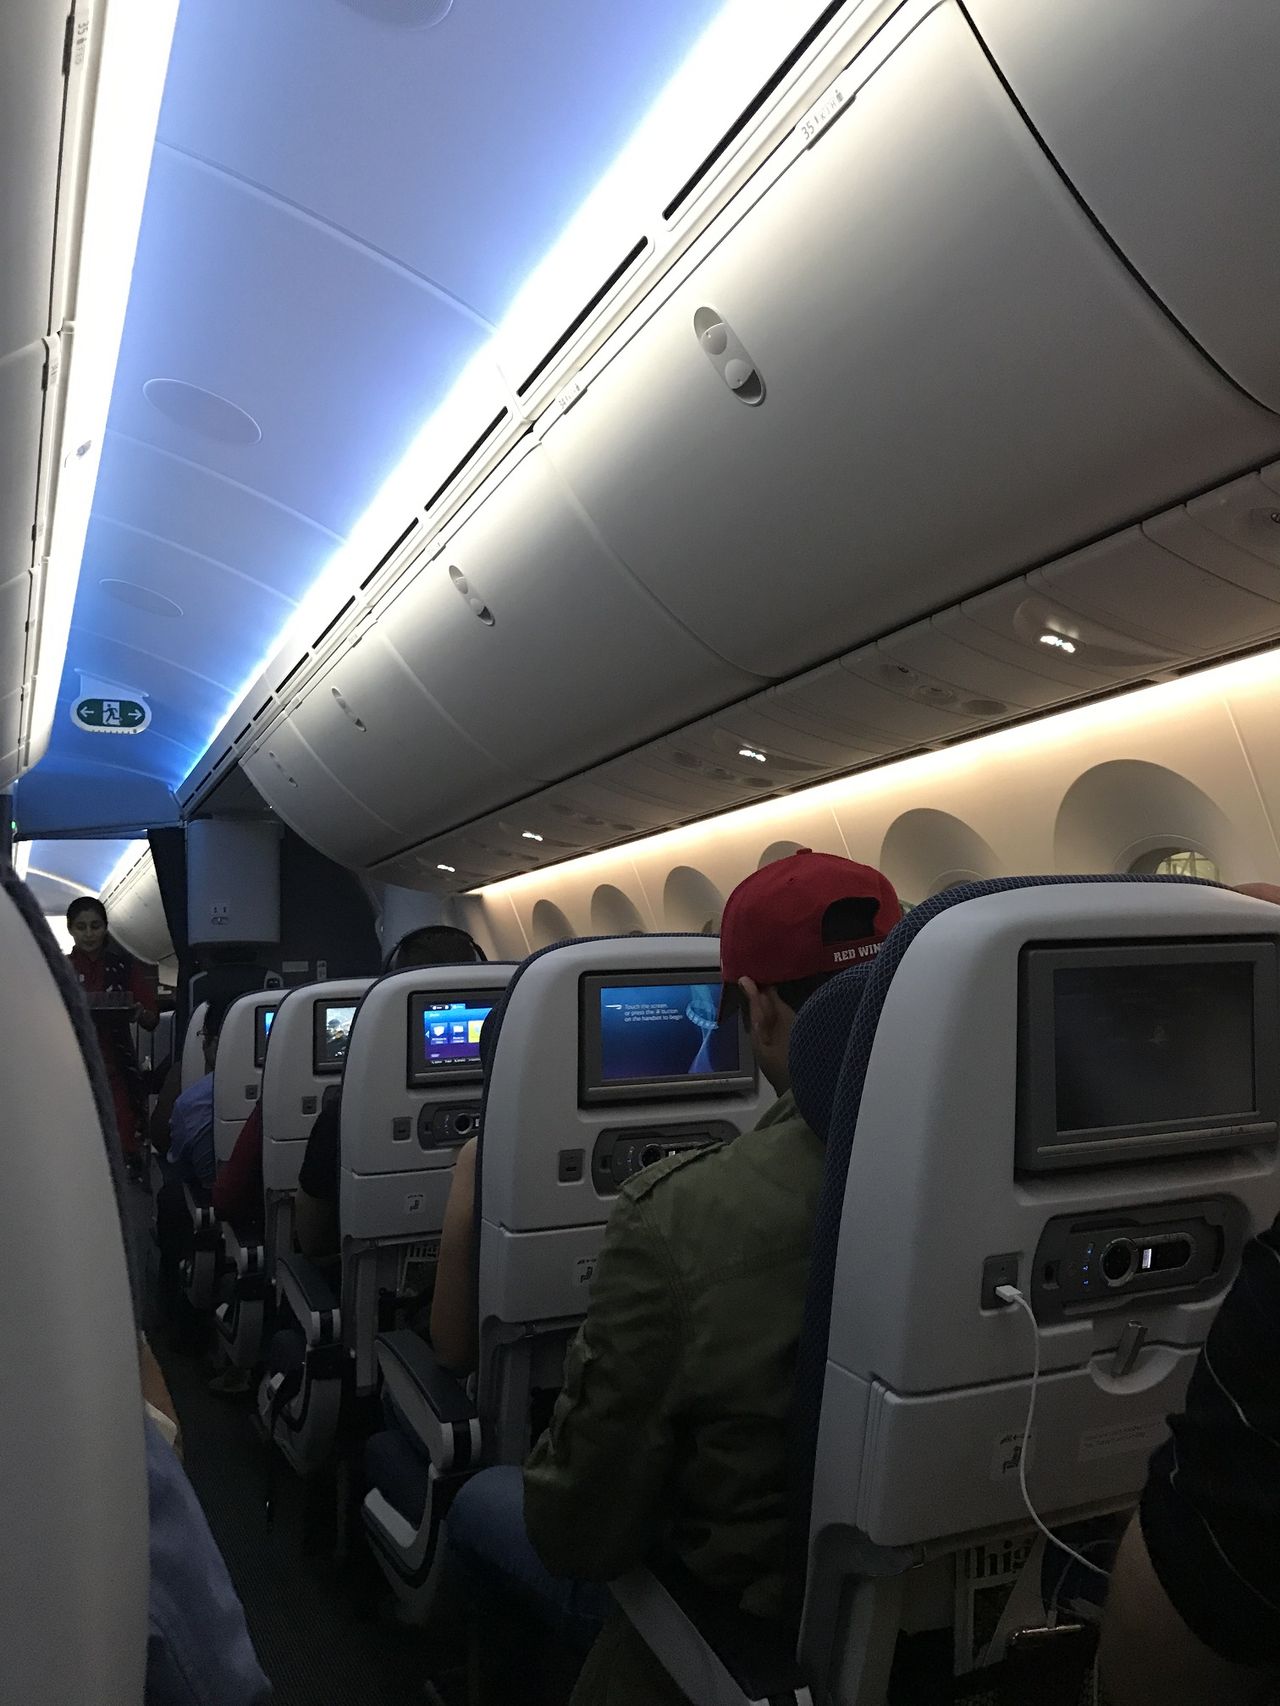 Review of British Airways flight from London to New Delhi in Economy